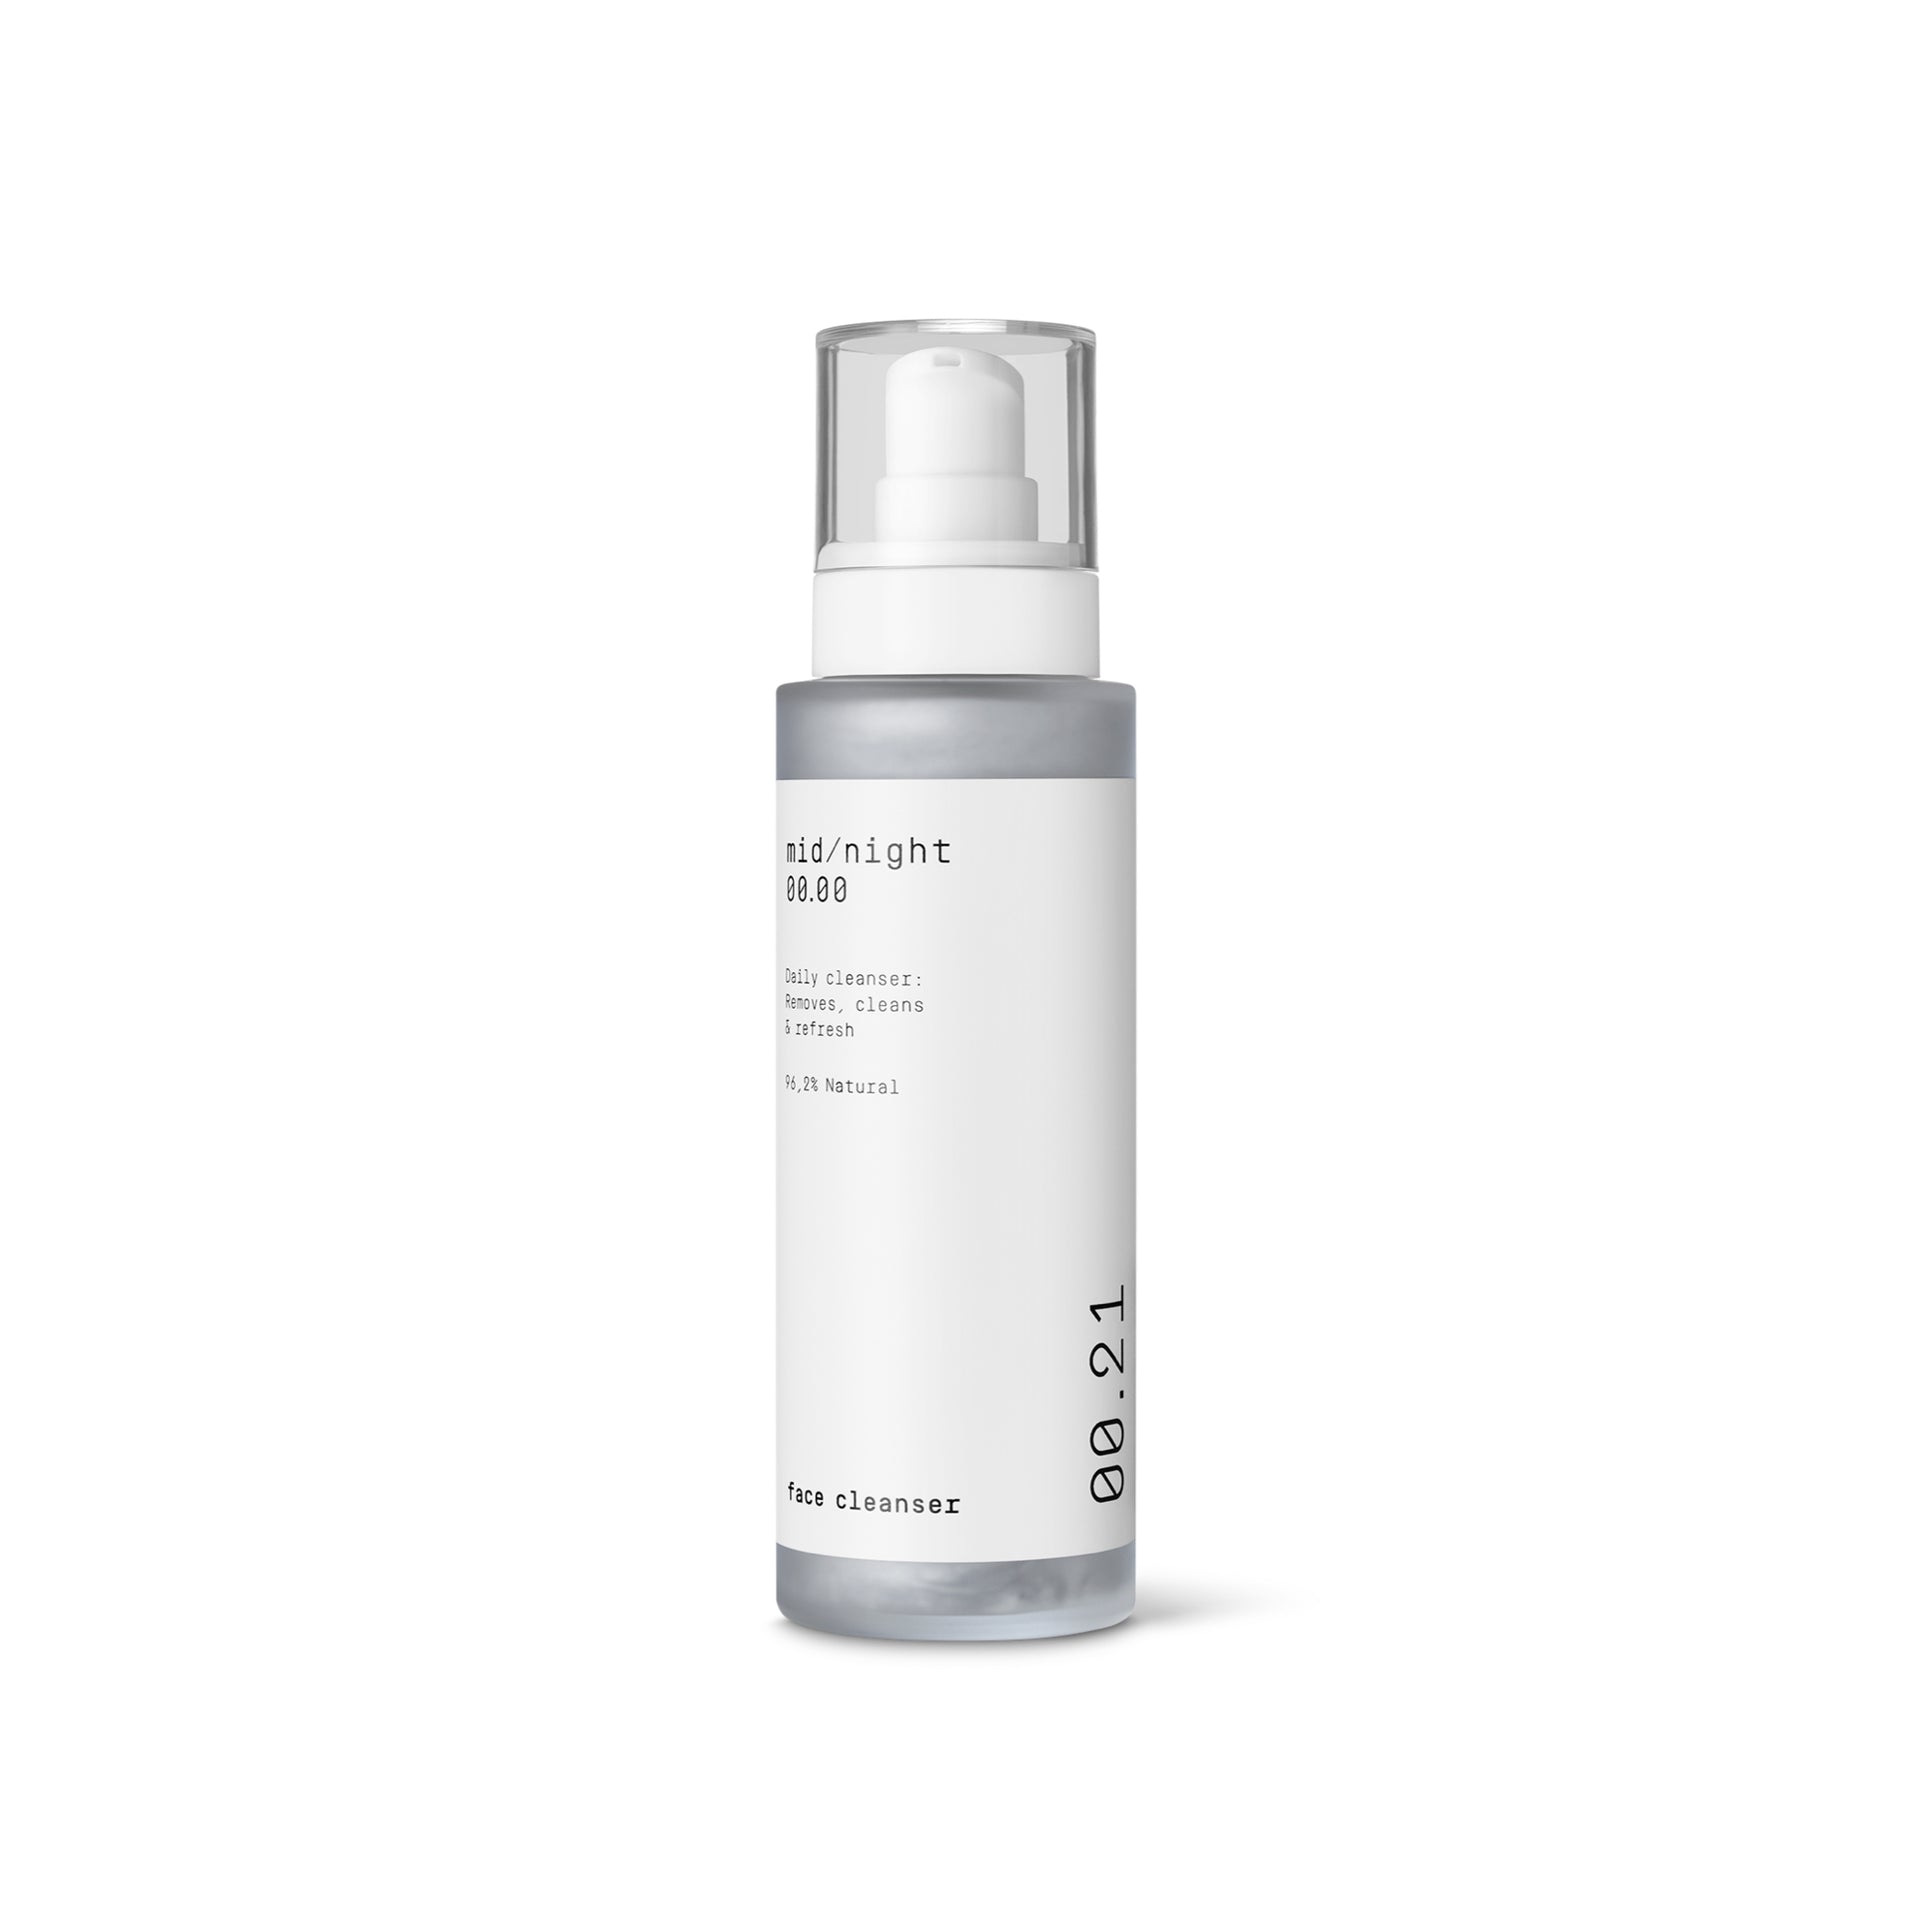 mid/night 00.00 Face Cleanser 00.21